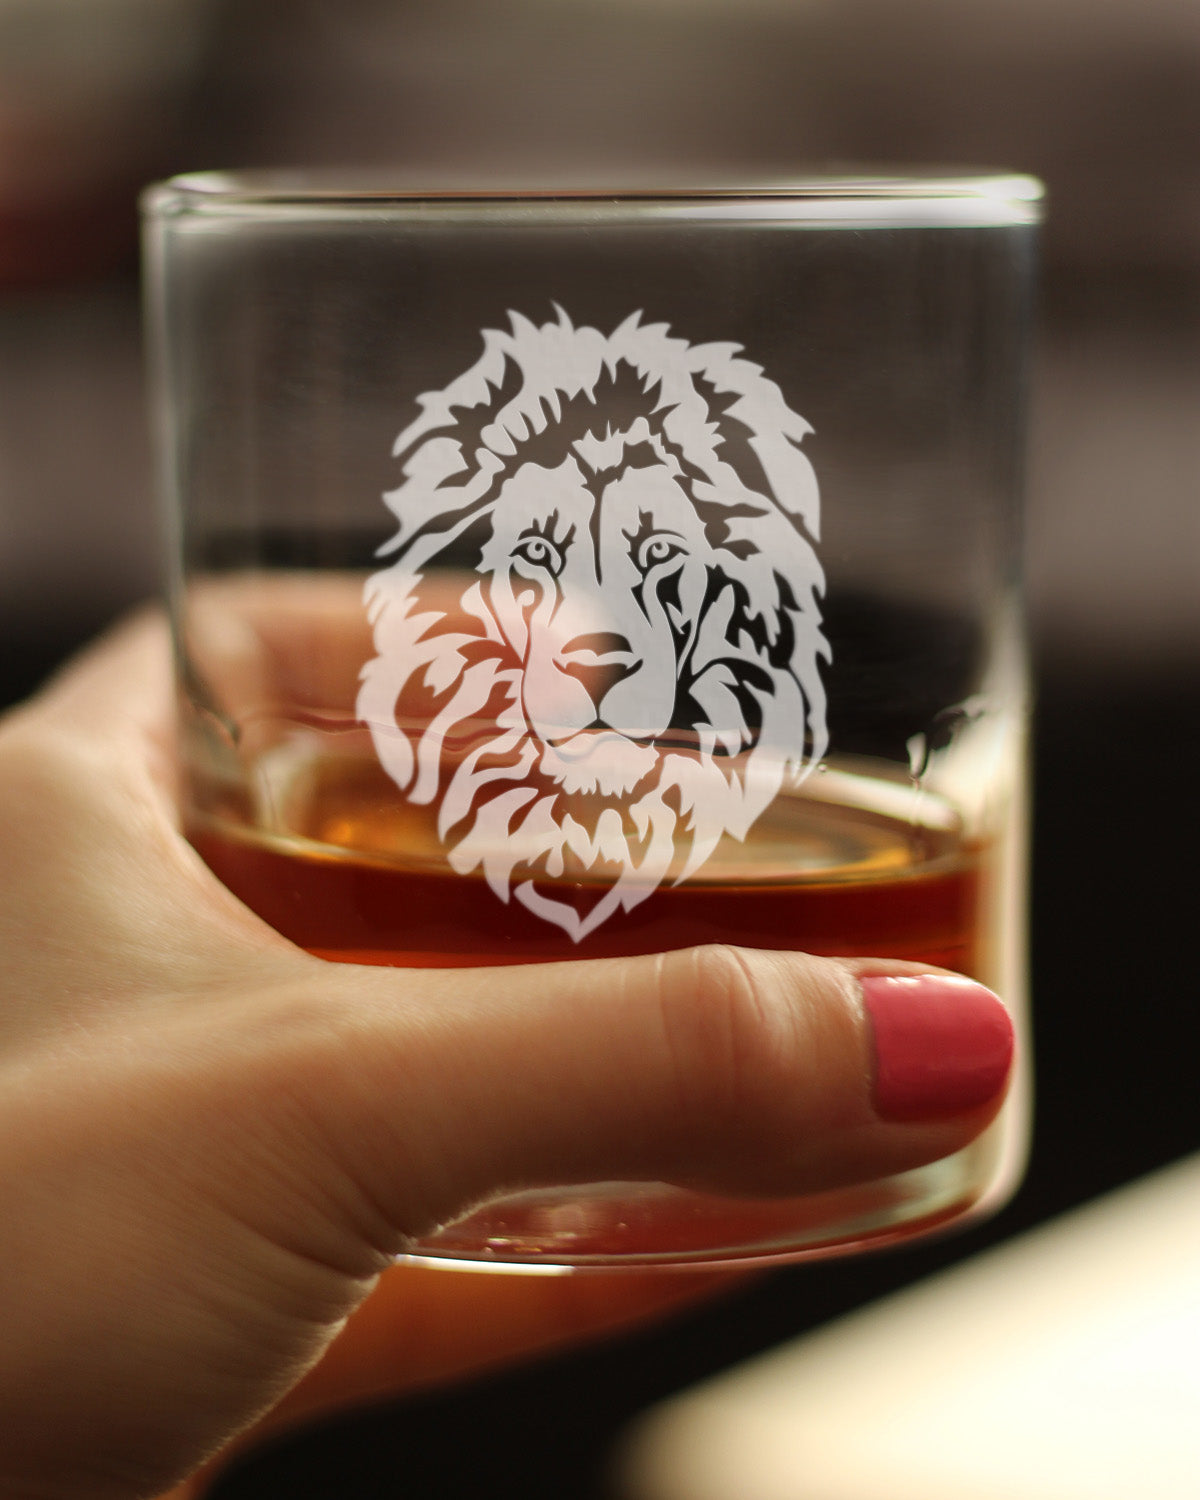 Lion Whiskey Rocks Glass - Fun Safari Themed Decor and Gifts for Lovers of African Wild Animals - 10.25 Oz Glasses